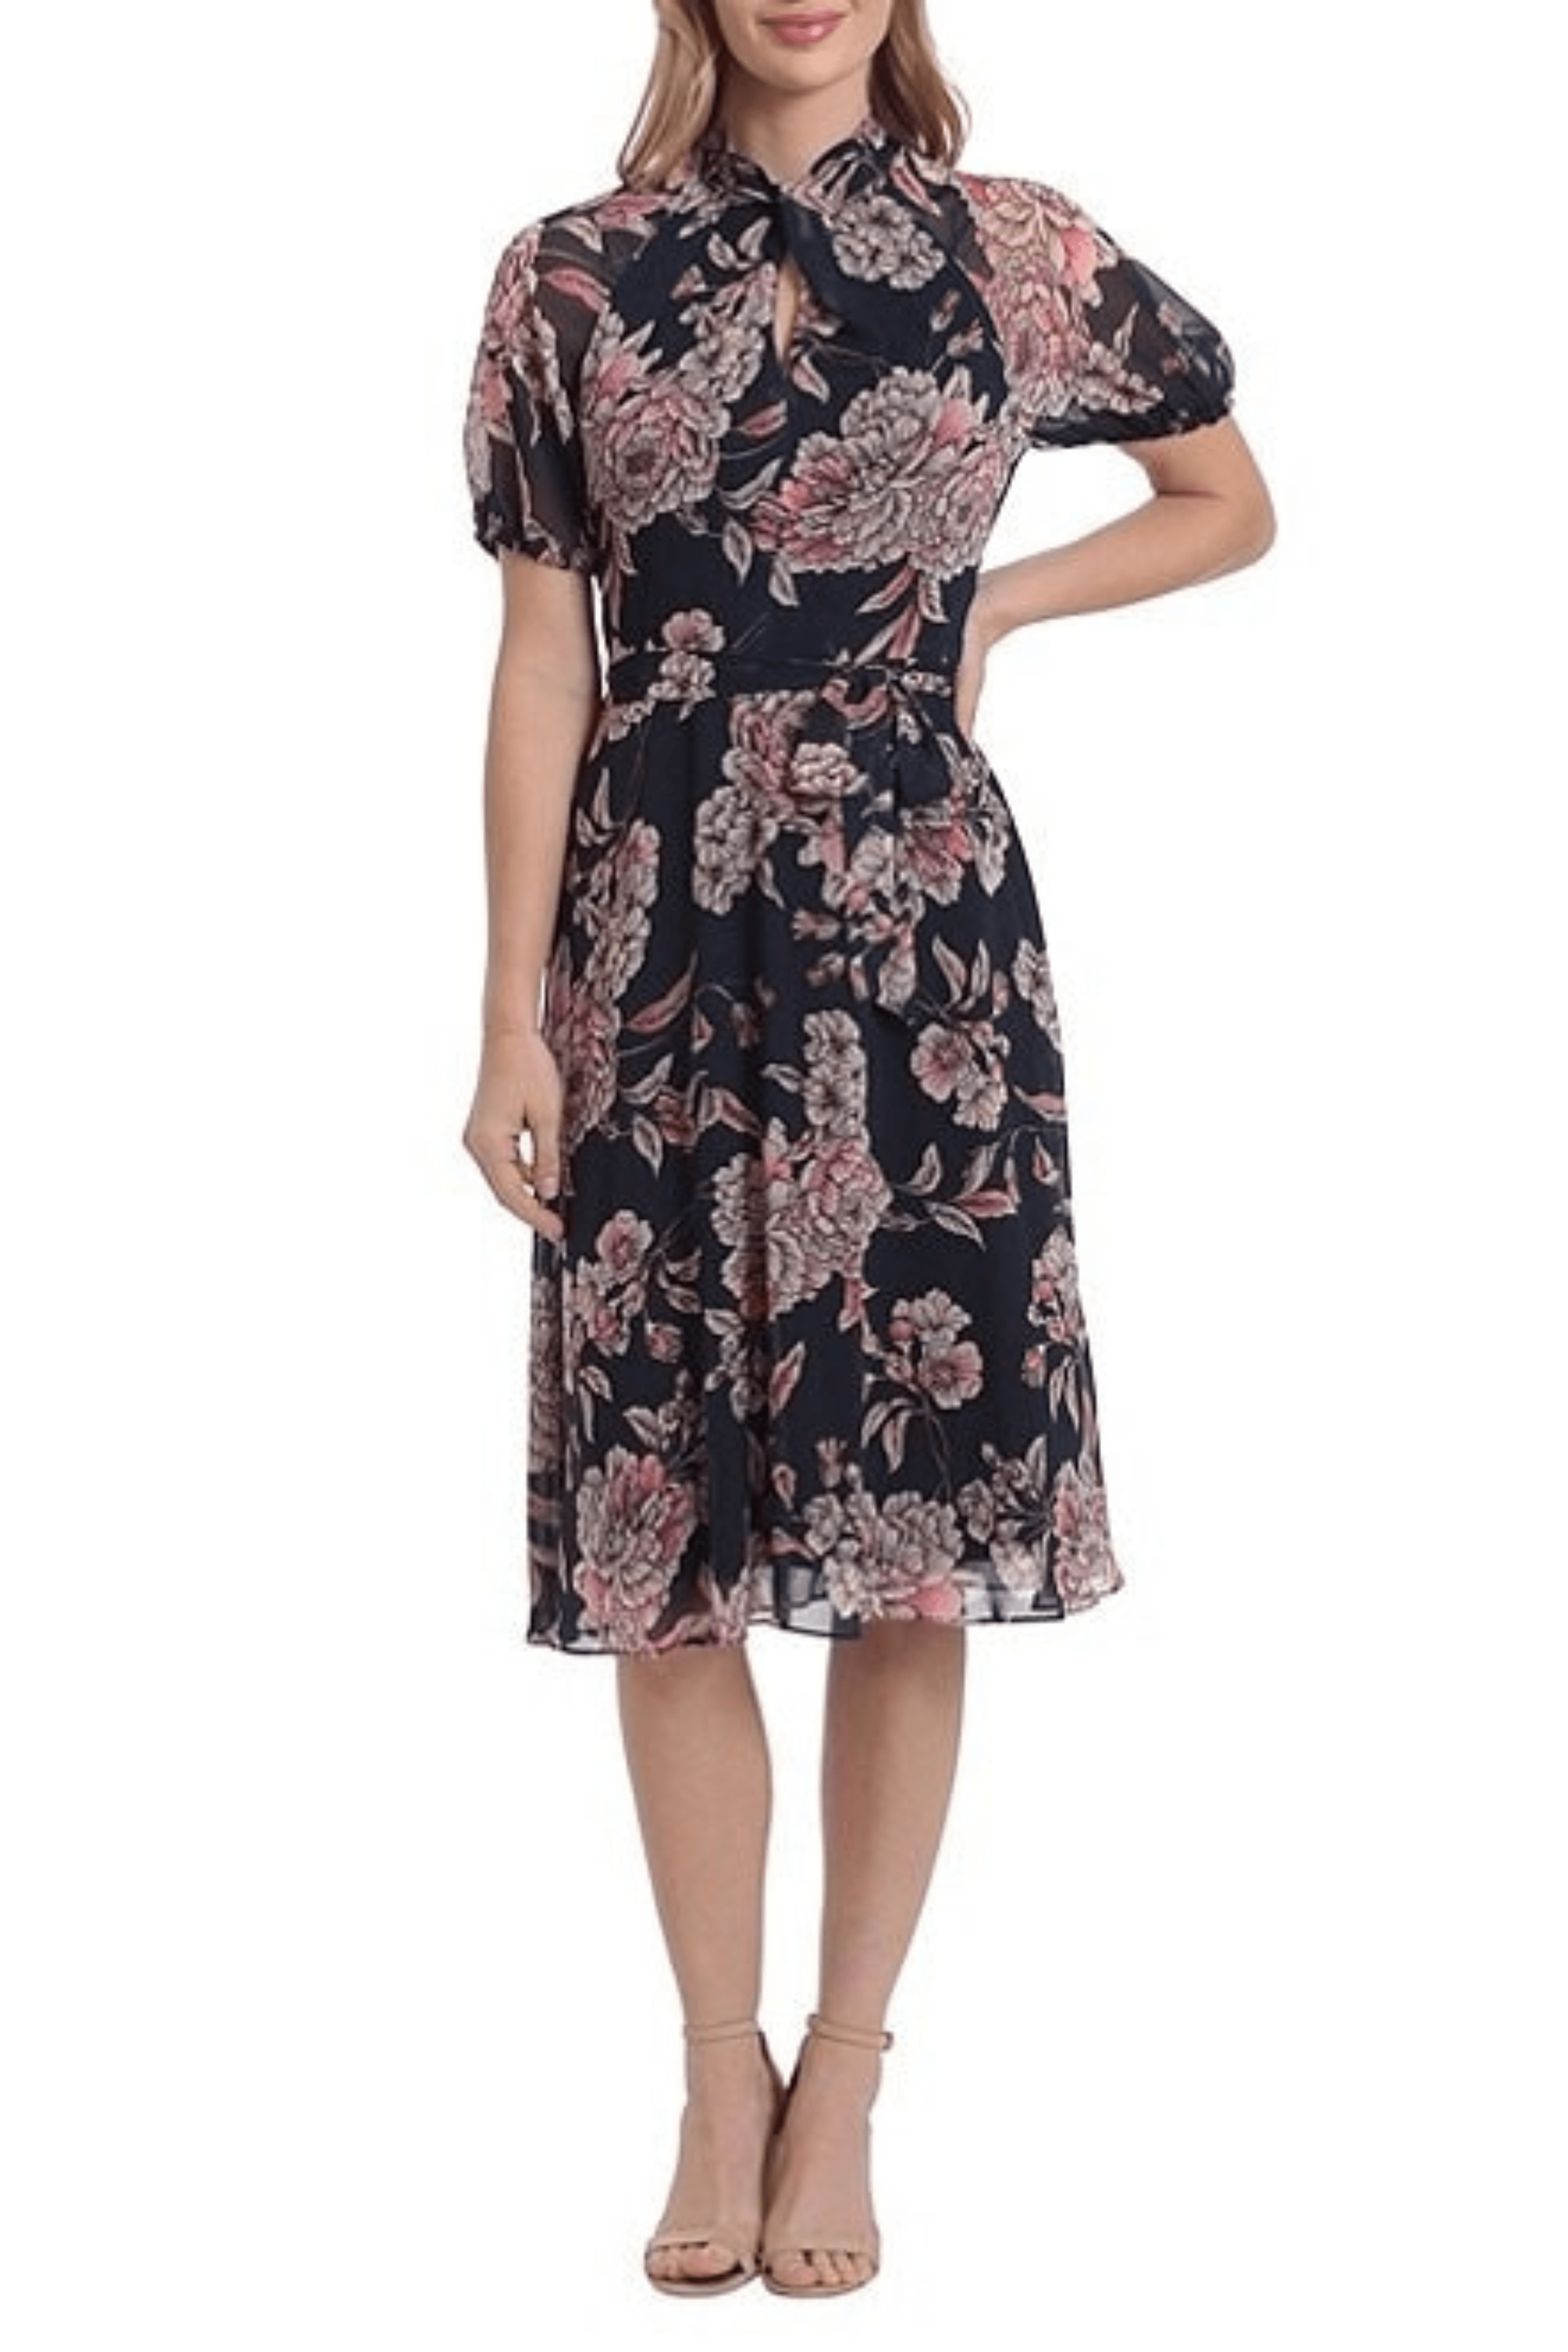 Image of London Times T6521M - High Neck A-Line Casual Dress